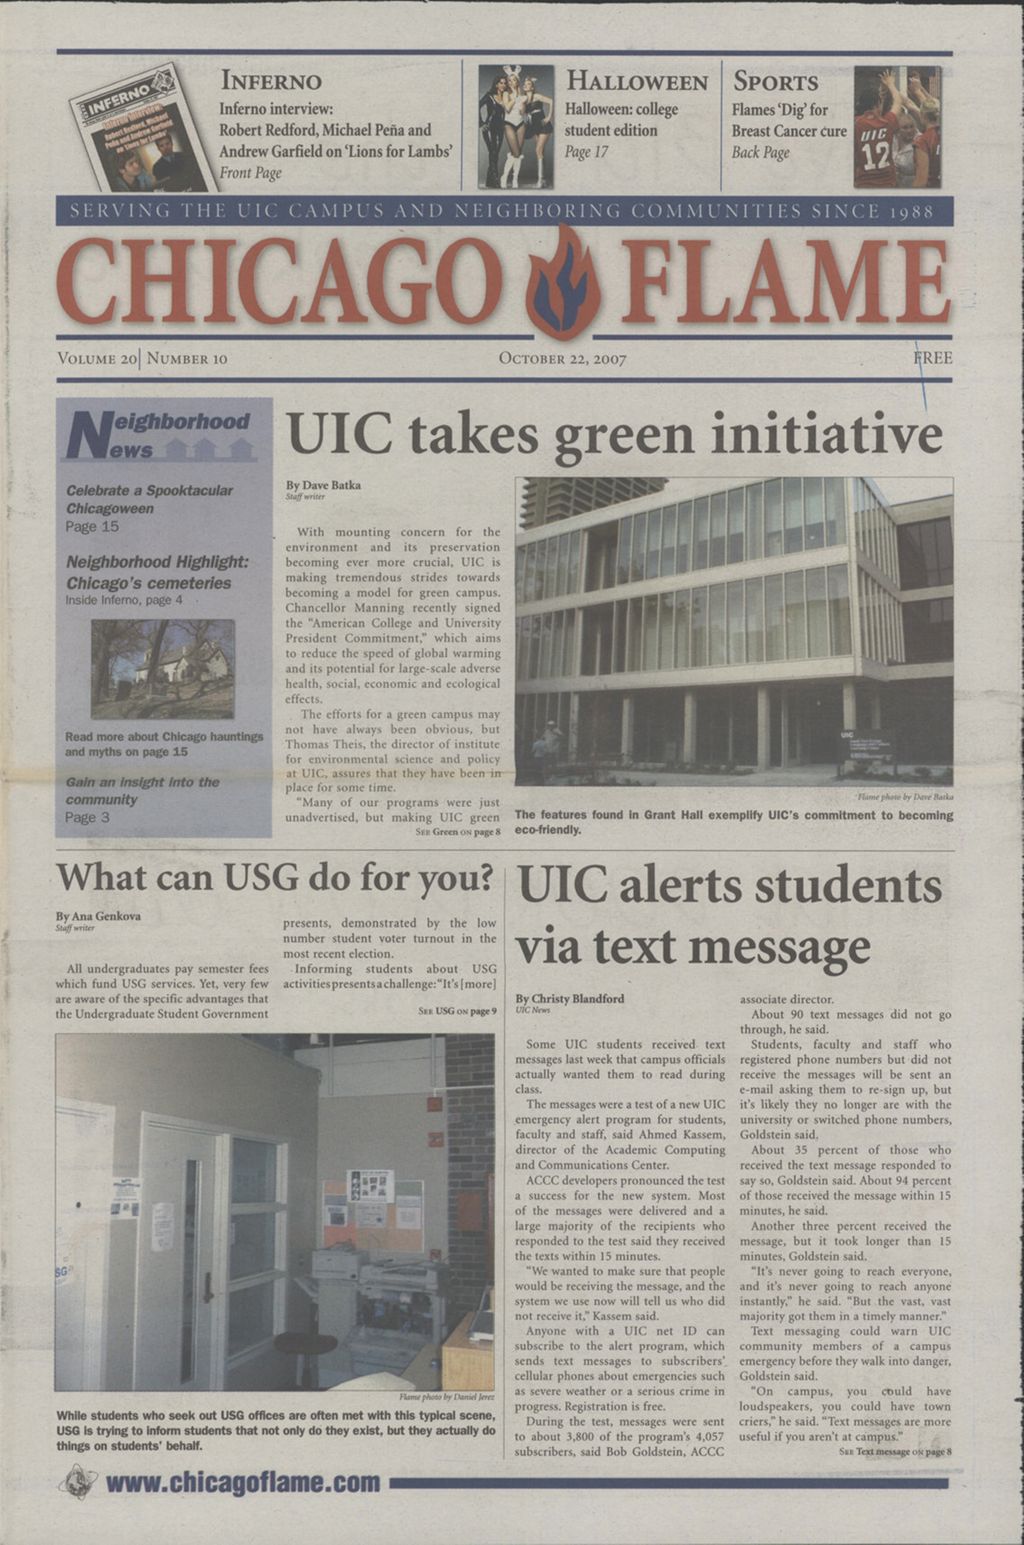 Chicago Flame (October 22, 2007)